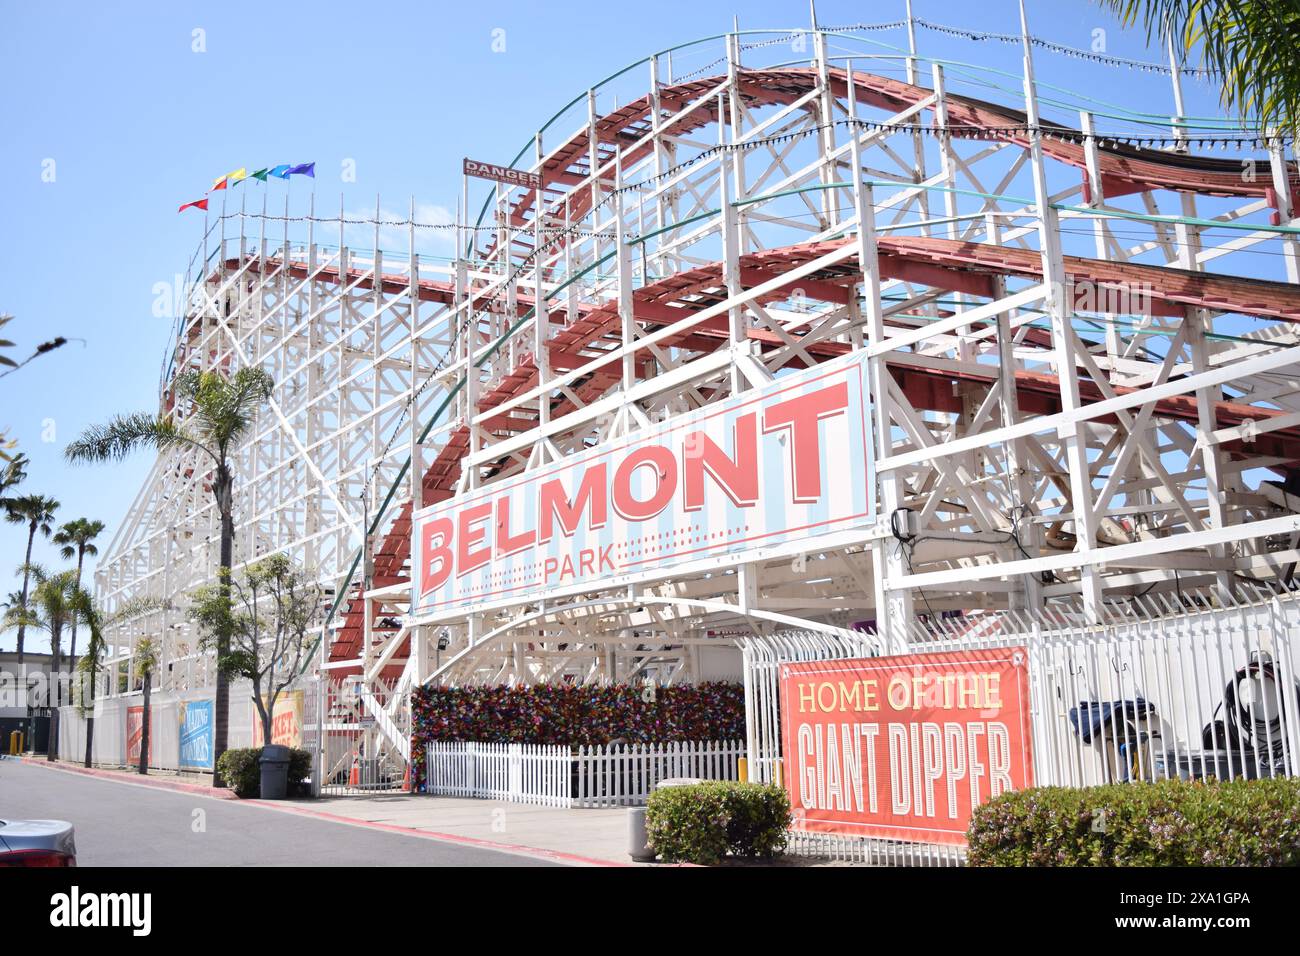 A roller coaster of Belmont Park, Mission Beach, San Diego, CA Stock Photo